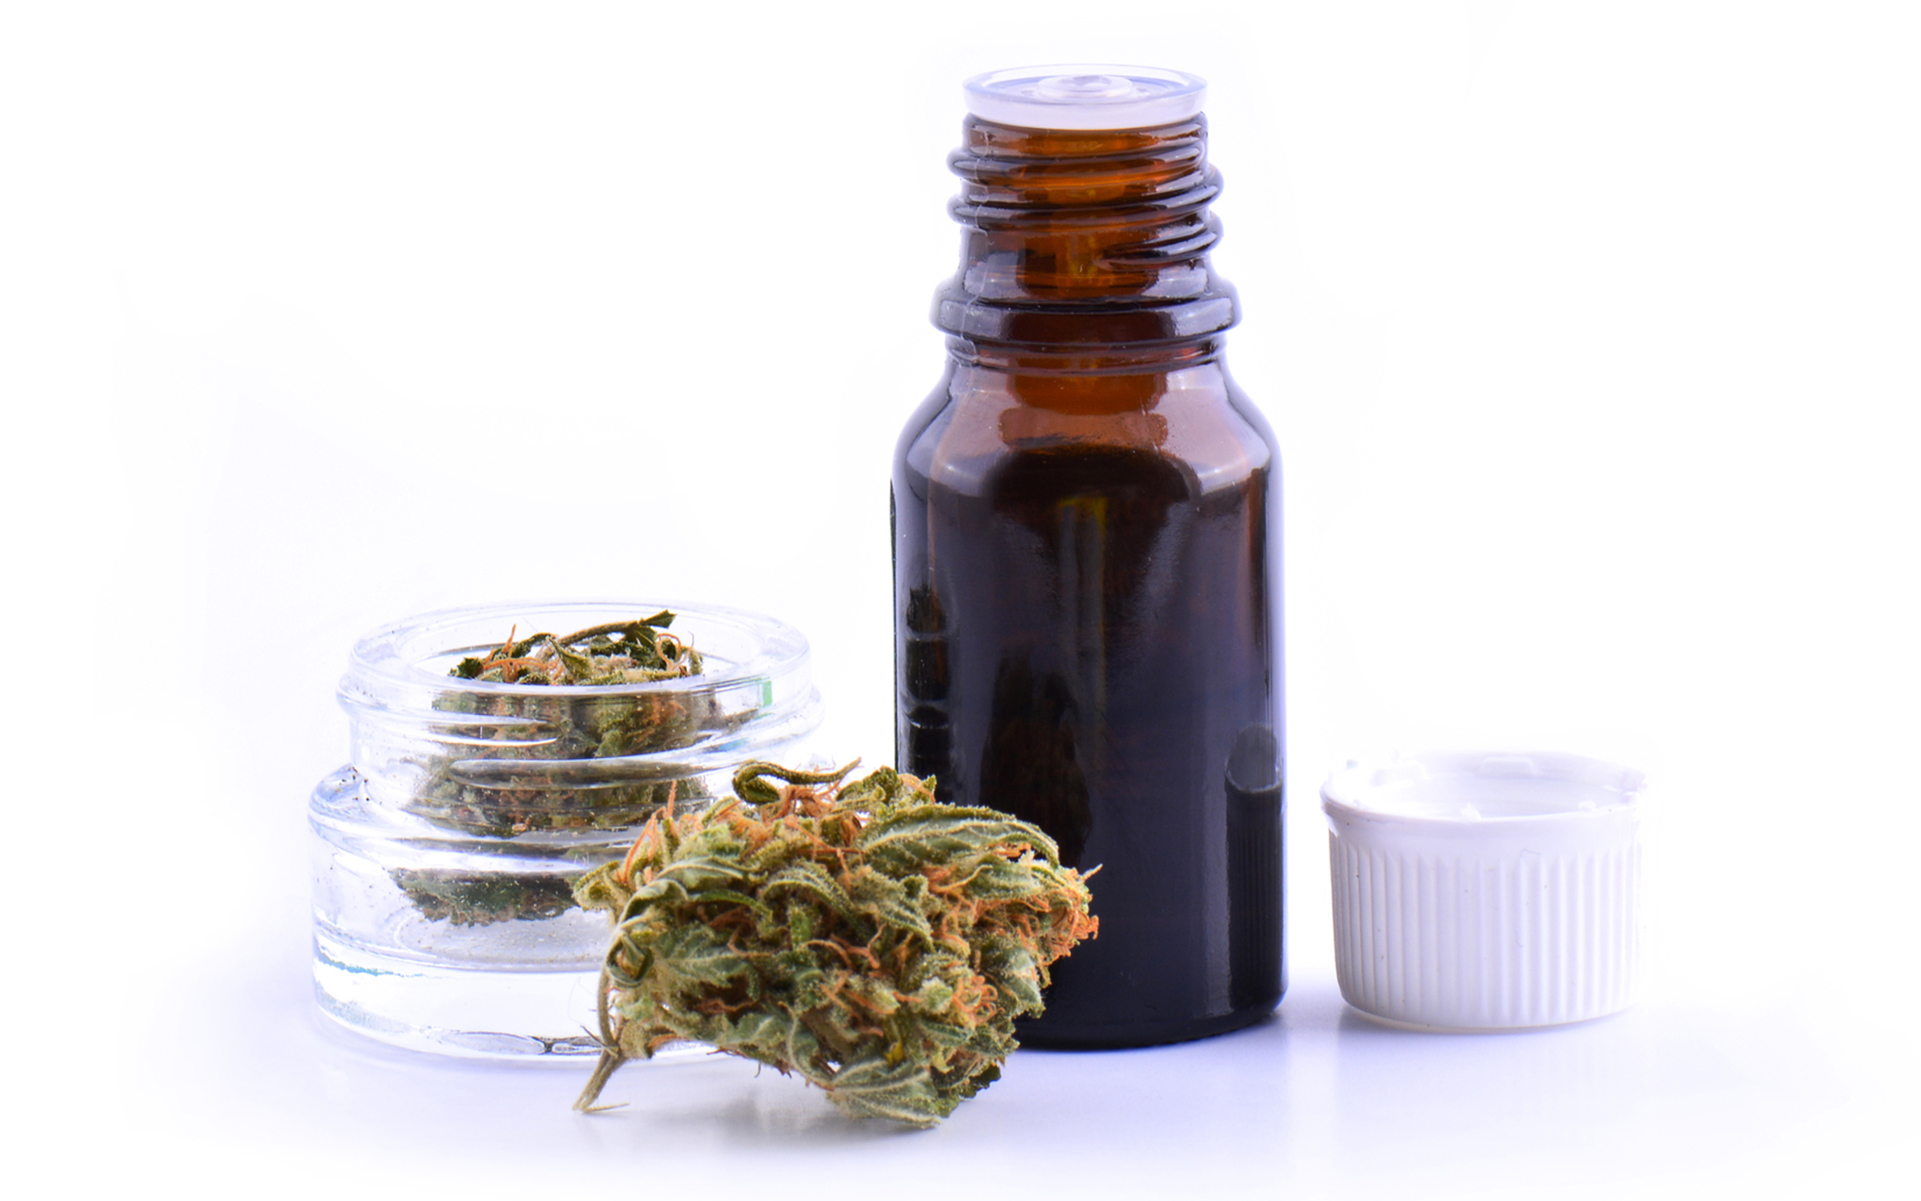 CBD: What Are The Health Benefits